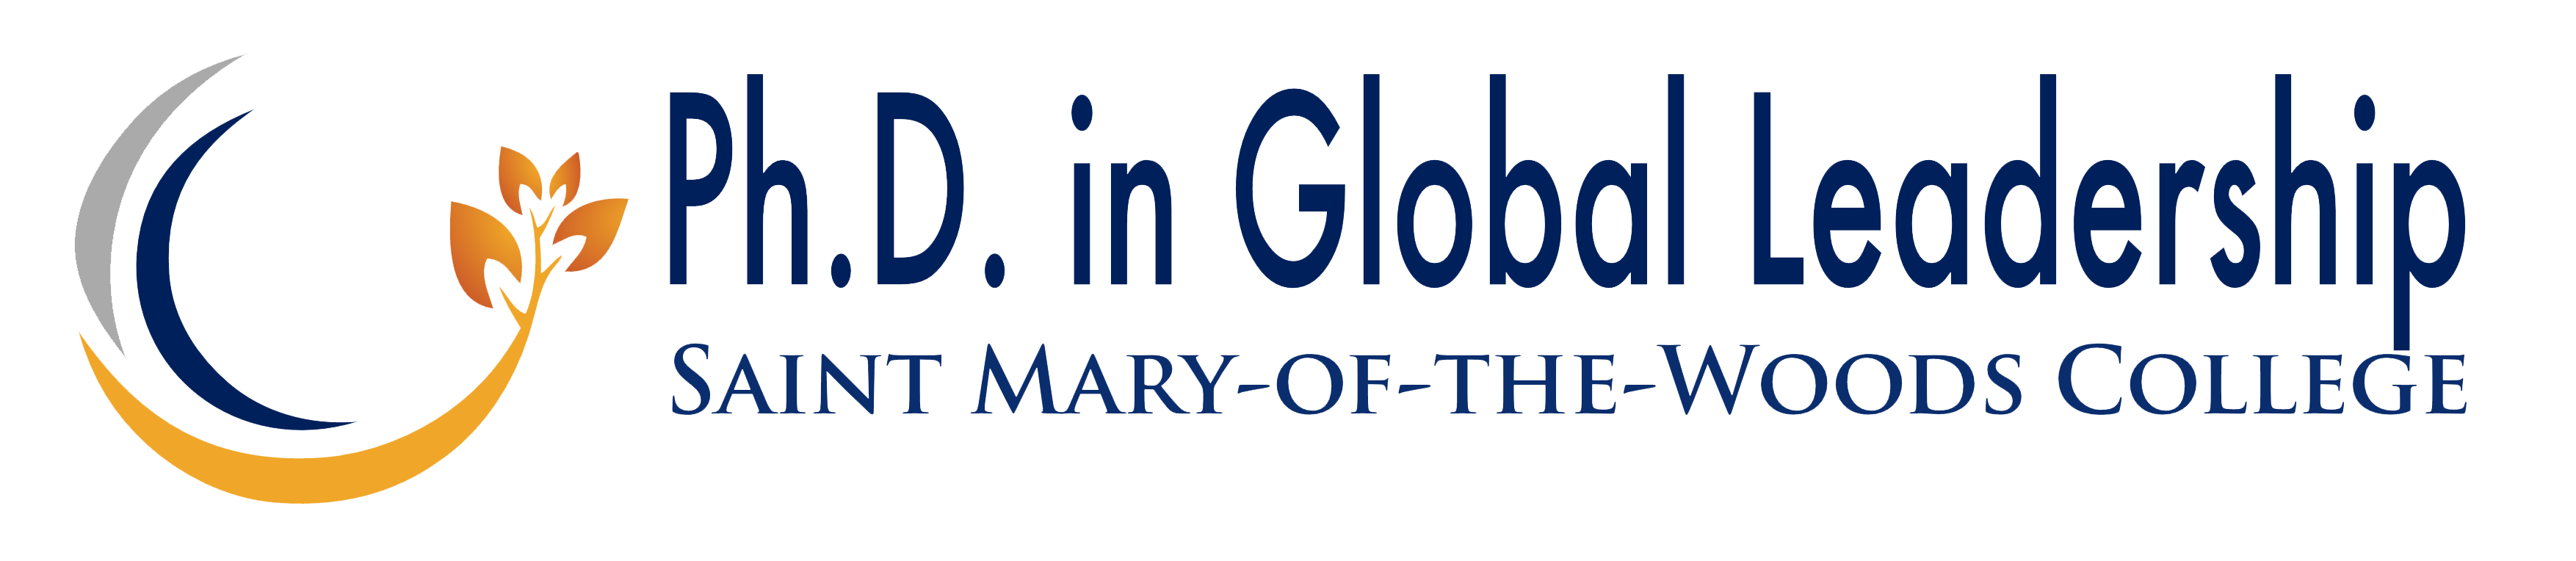 ph-d-in-global-leadership-saint-mary-of-the-woods-college